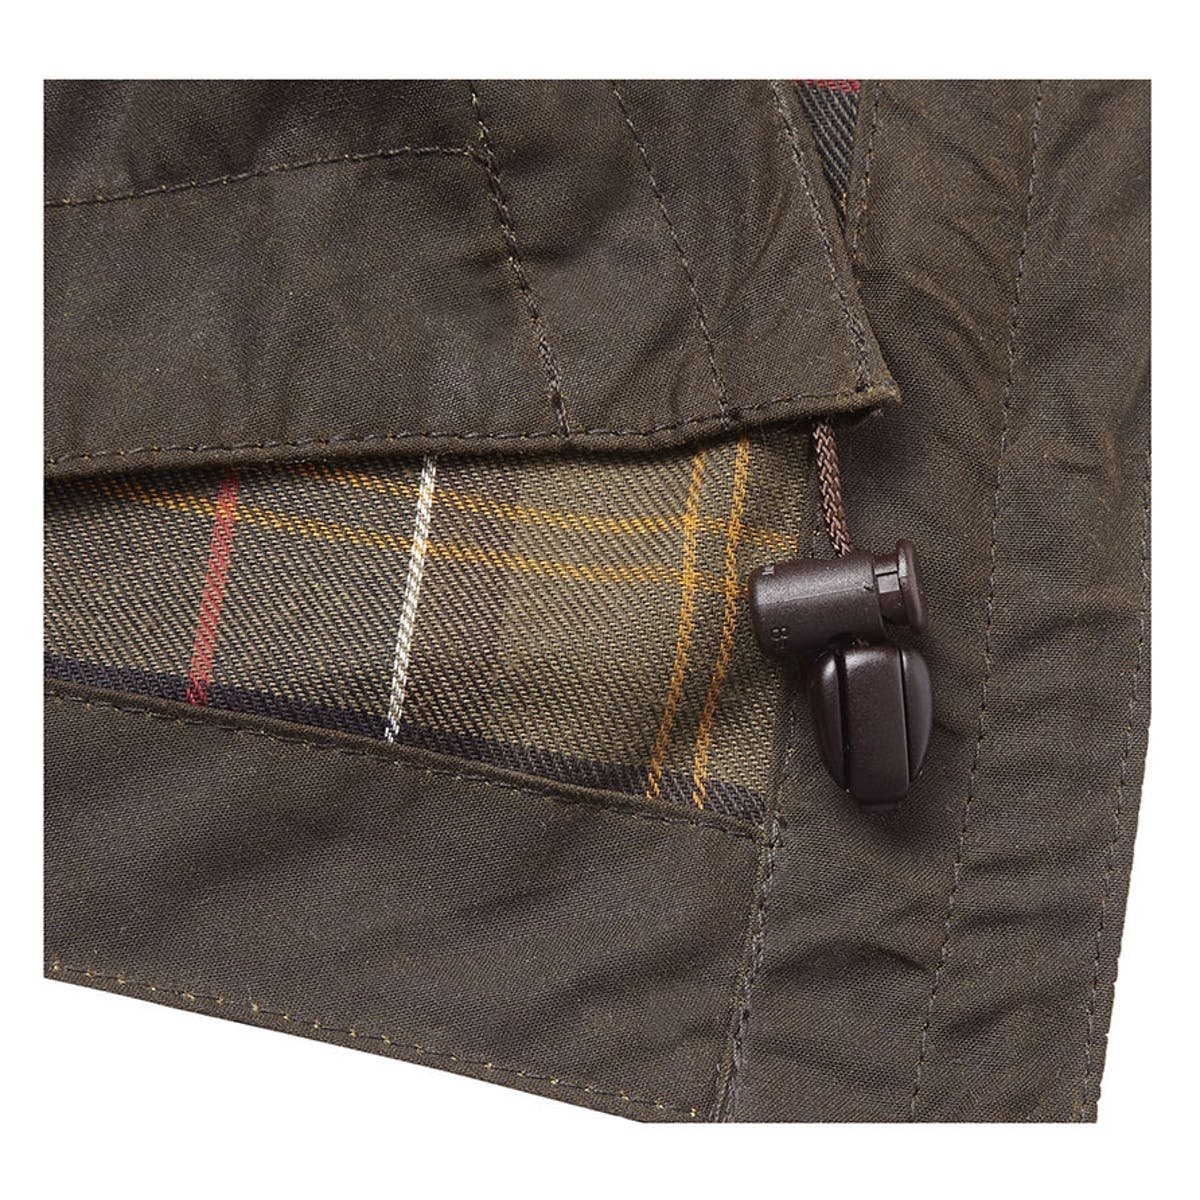 barbour classic sylkoil hood